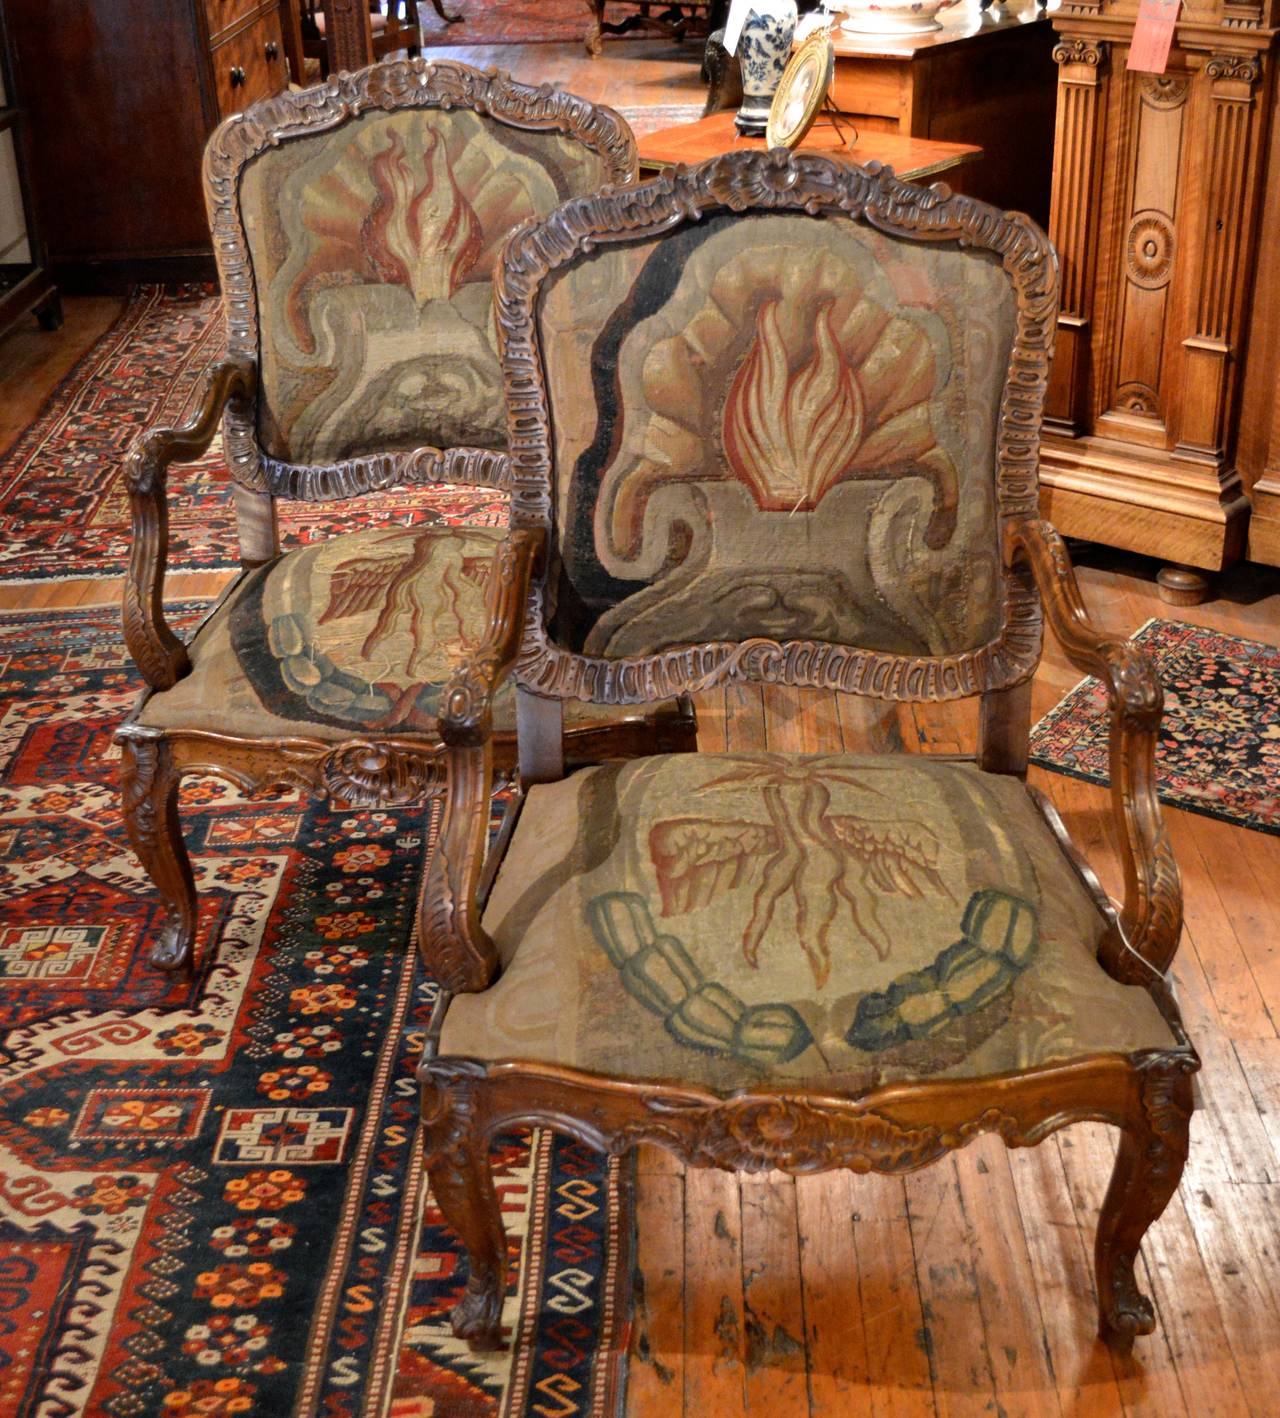 Pair of finely carved walnut Louis XV style Rococo fauteuil a la reine with beautiful 18th century needlepoint upholstered seats and backs, unusual motif possibly masonic.